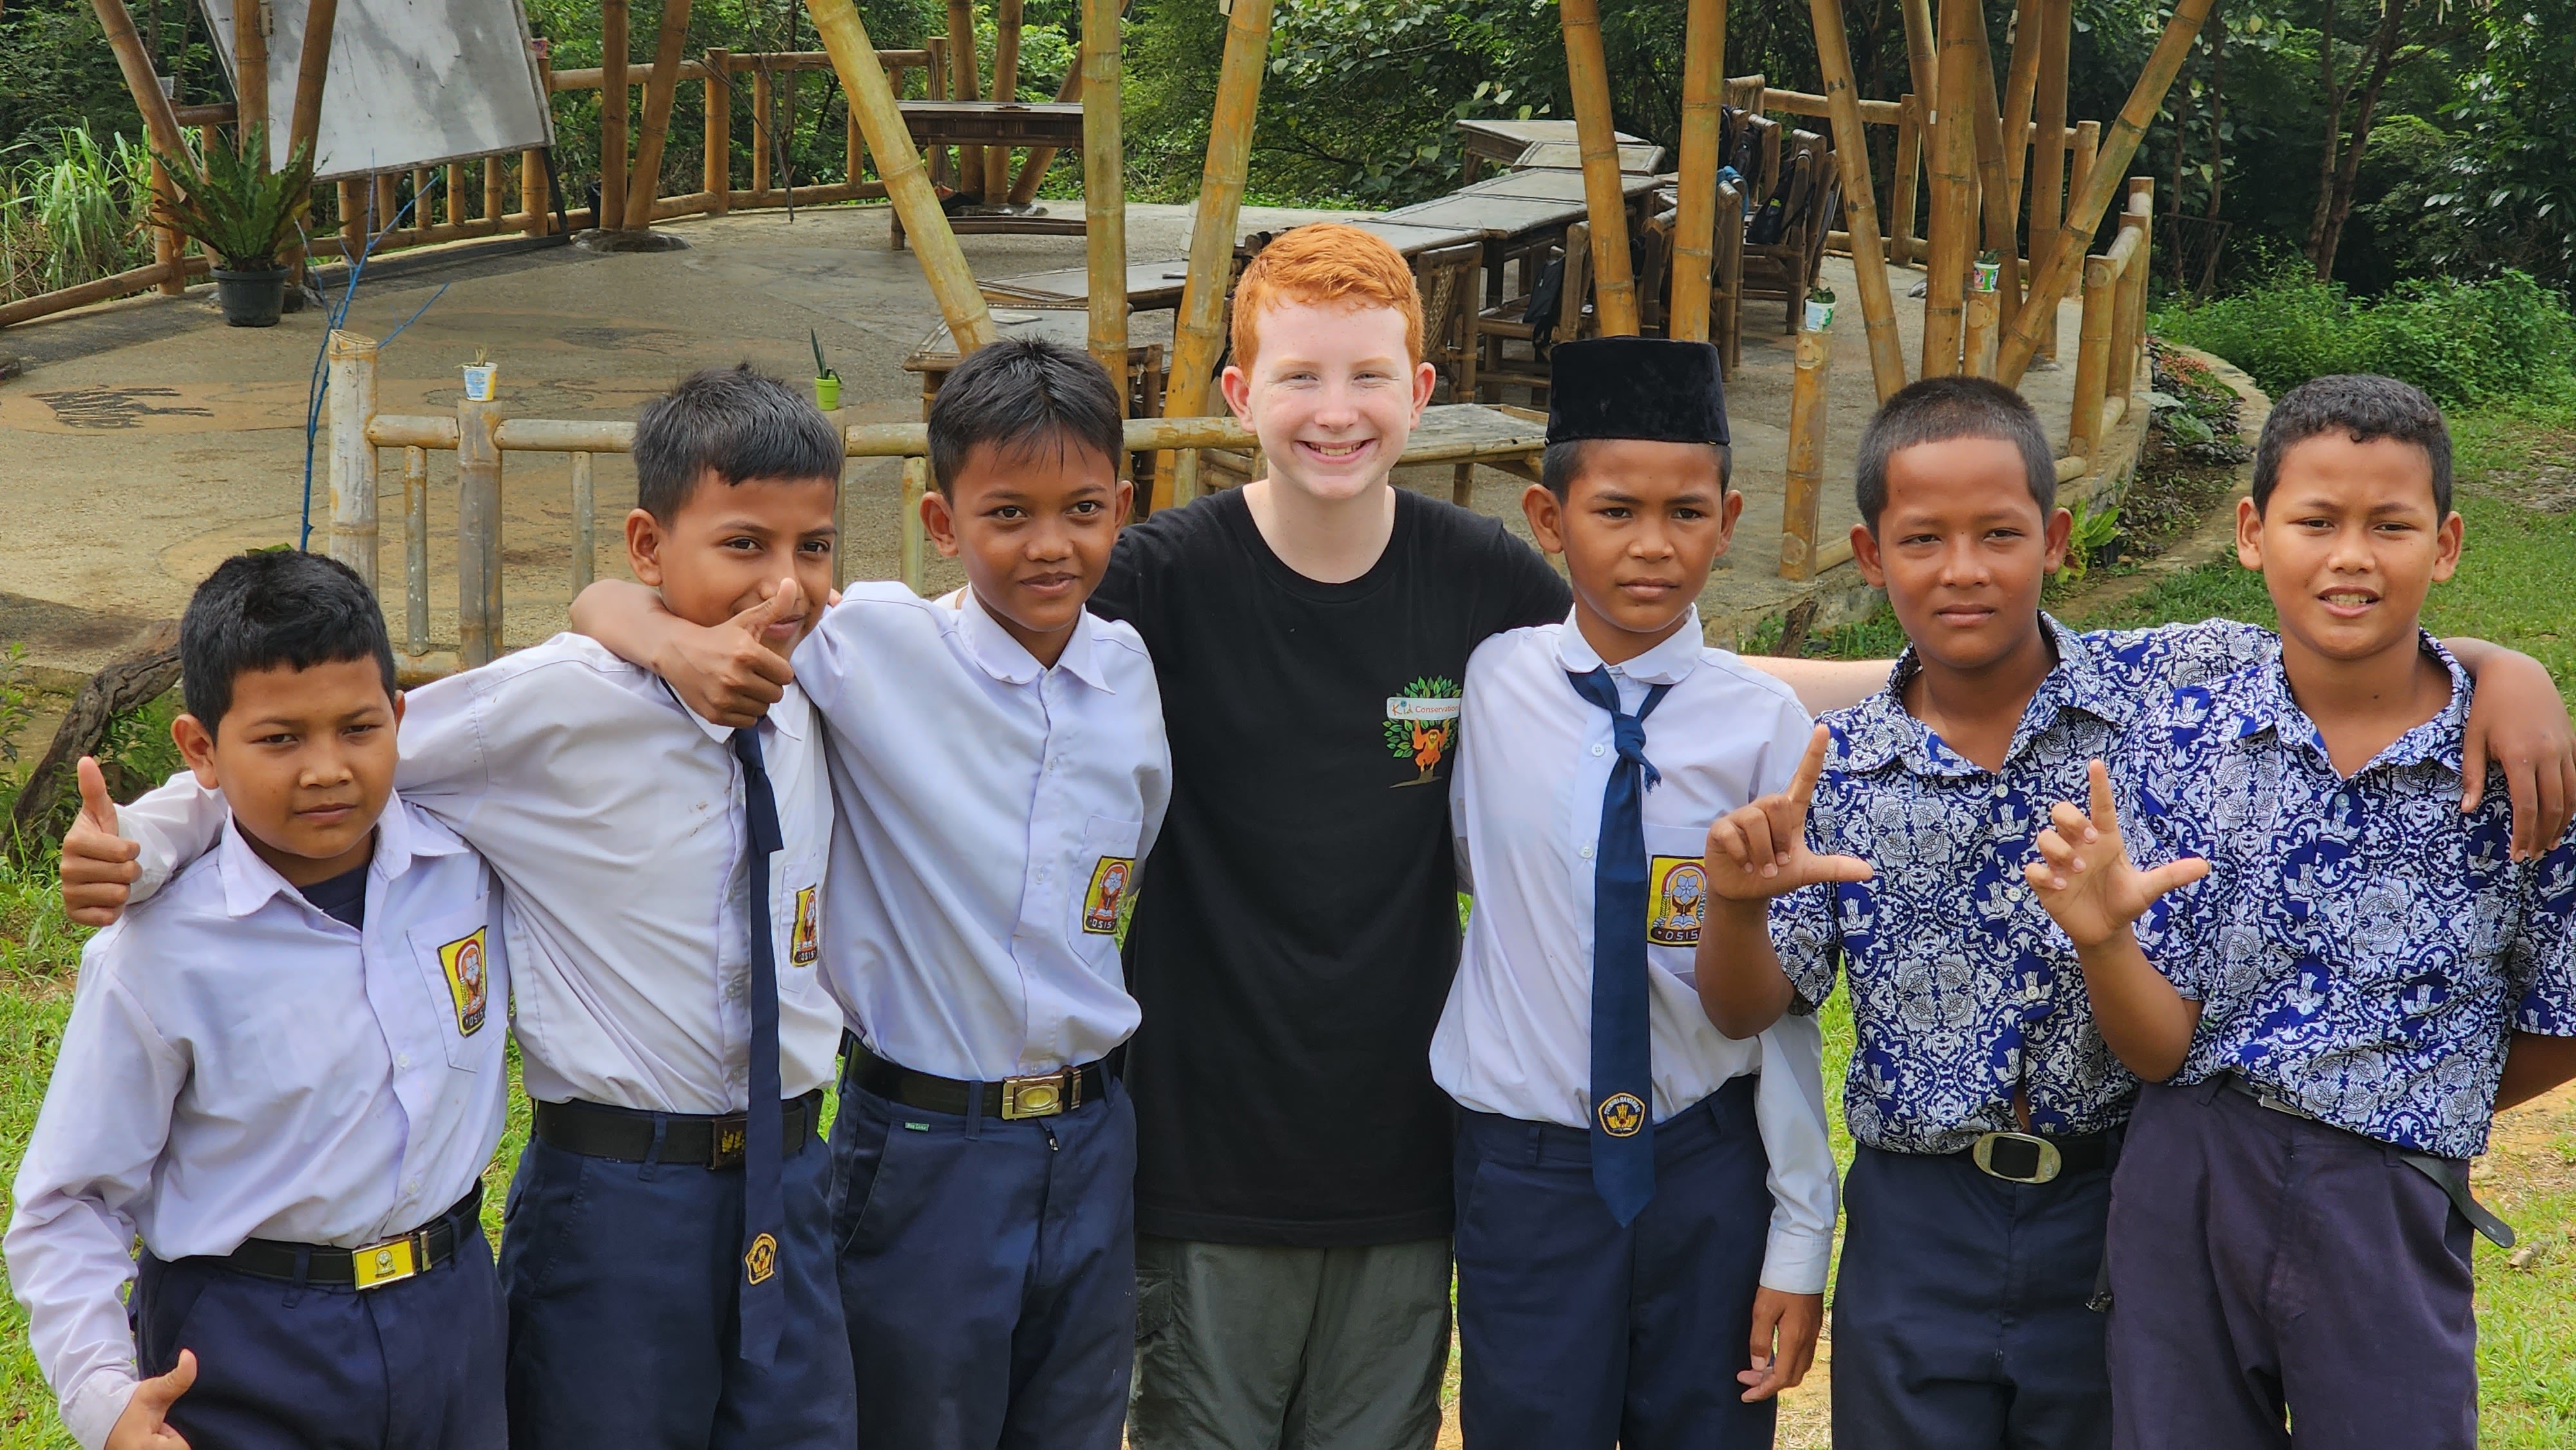 Jack with some students at The Leuser School.